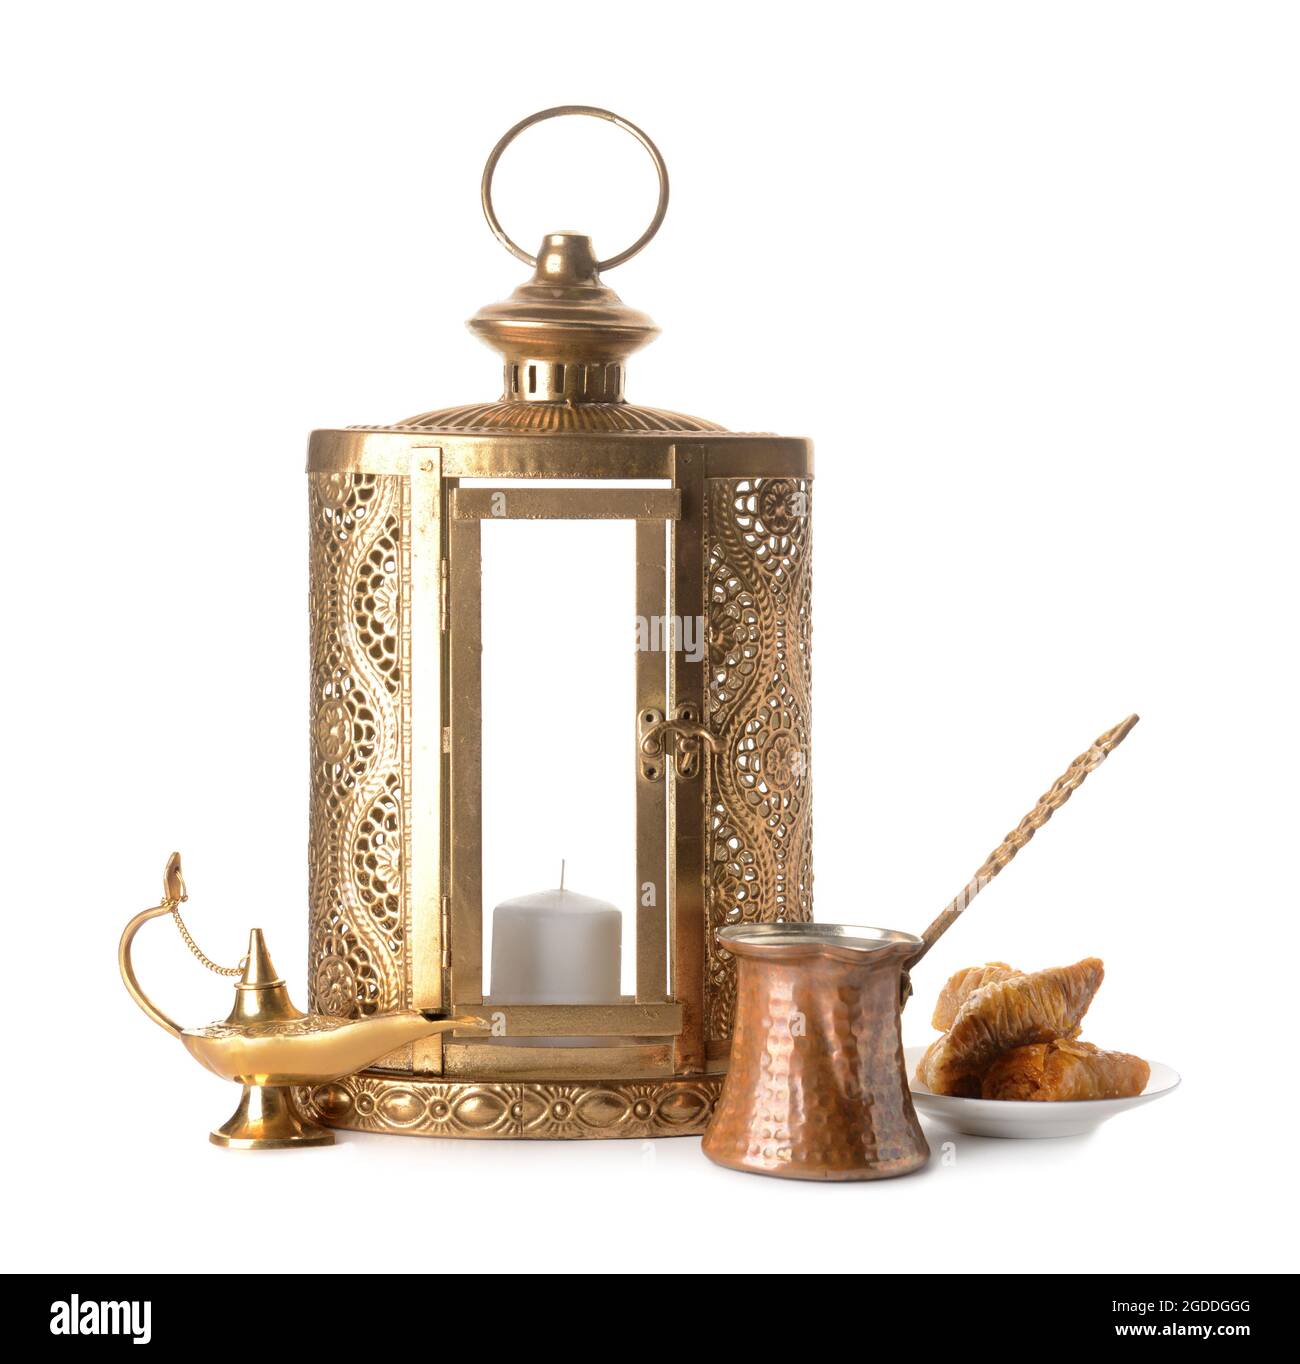 Muslim lantern with Aladdin lamp, coffee and Turkish sweets on white background Stock Photo